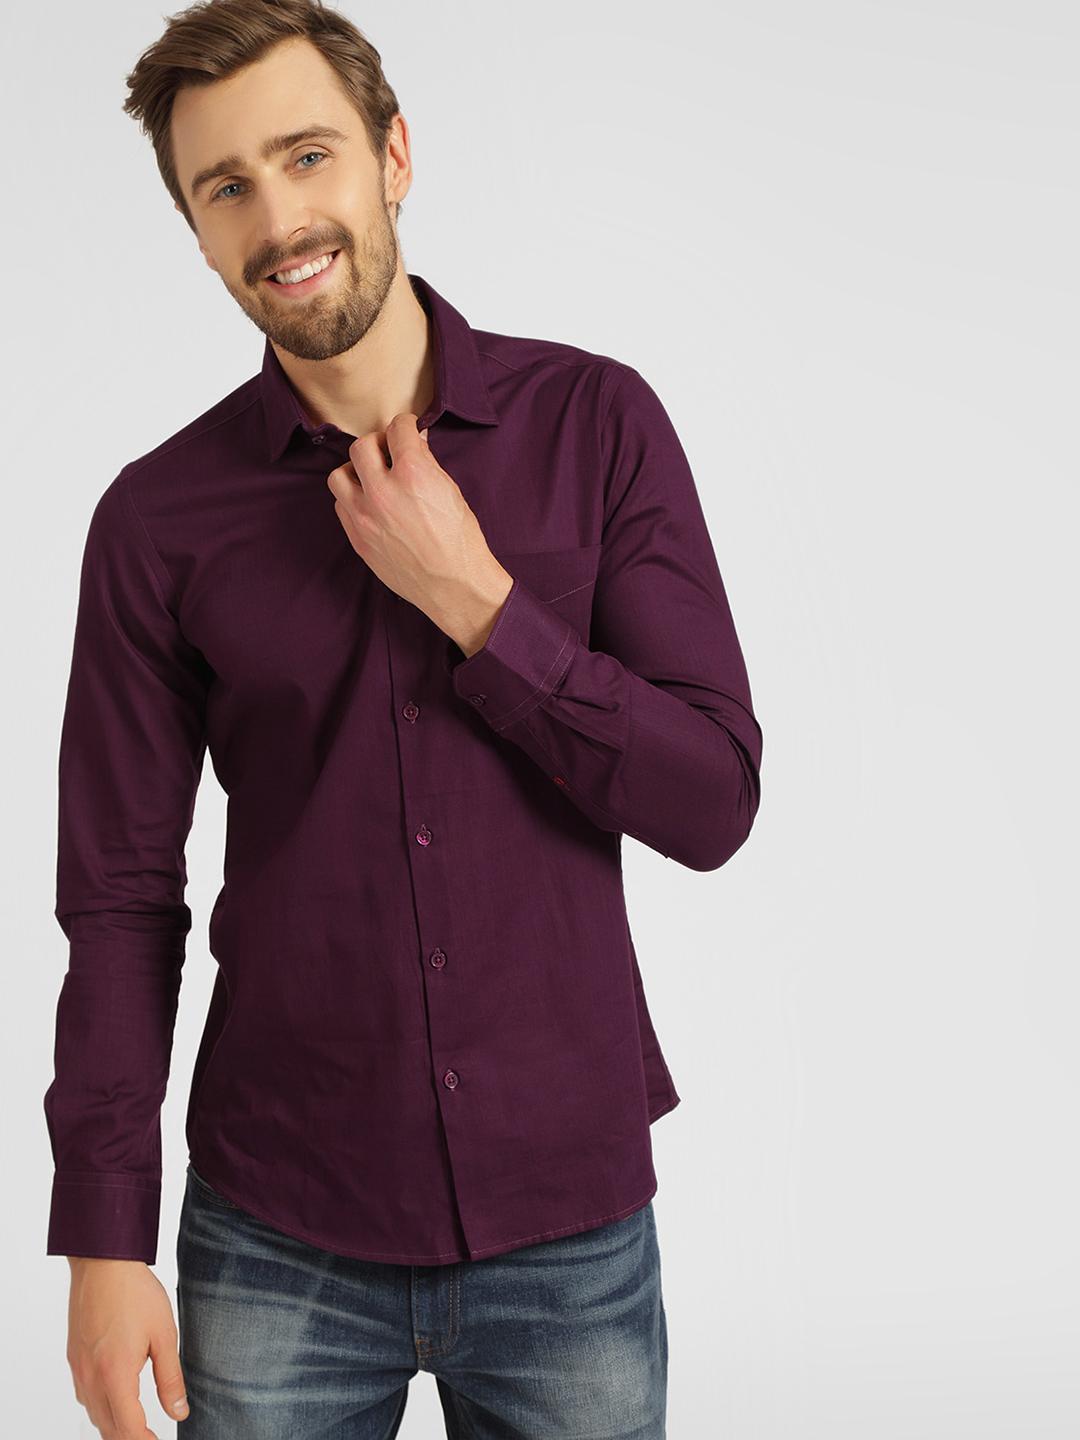 LAWMANPg3, Integriti & More Brands Shirts Worth Rs.1499 @ Rs.599 + Free Shipping